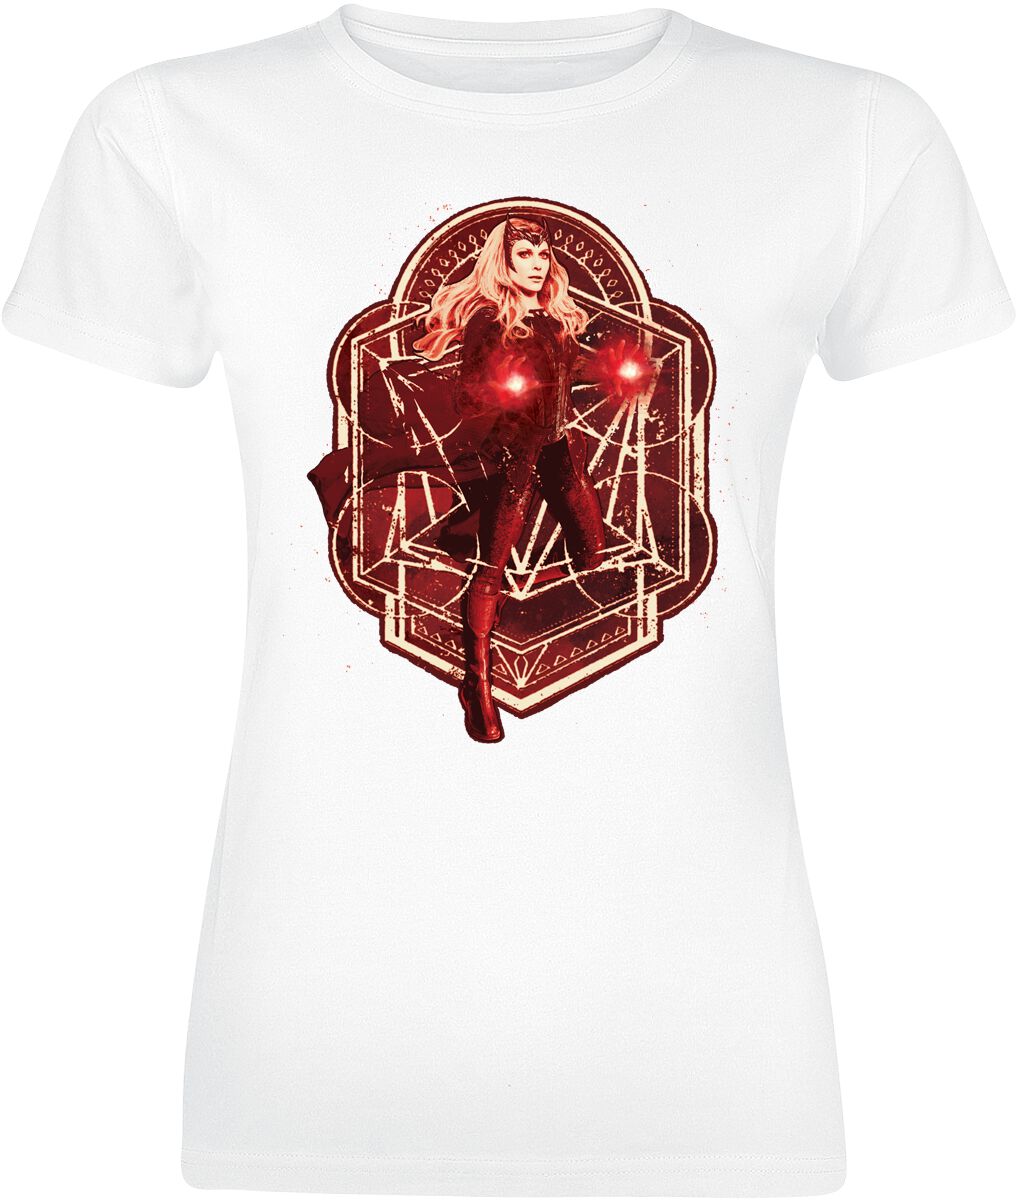 Doctor Strange In The Multiverse Of Madness - Wanda T-Shirt white